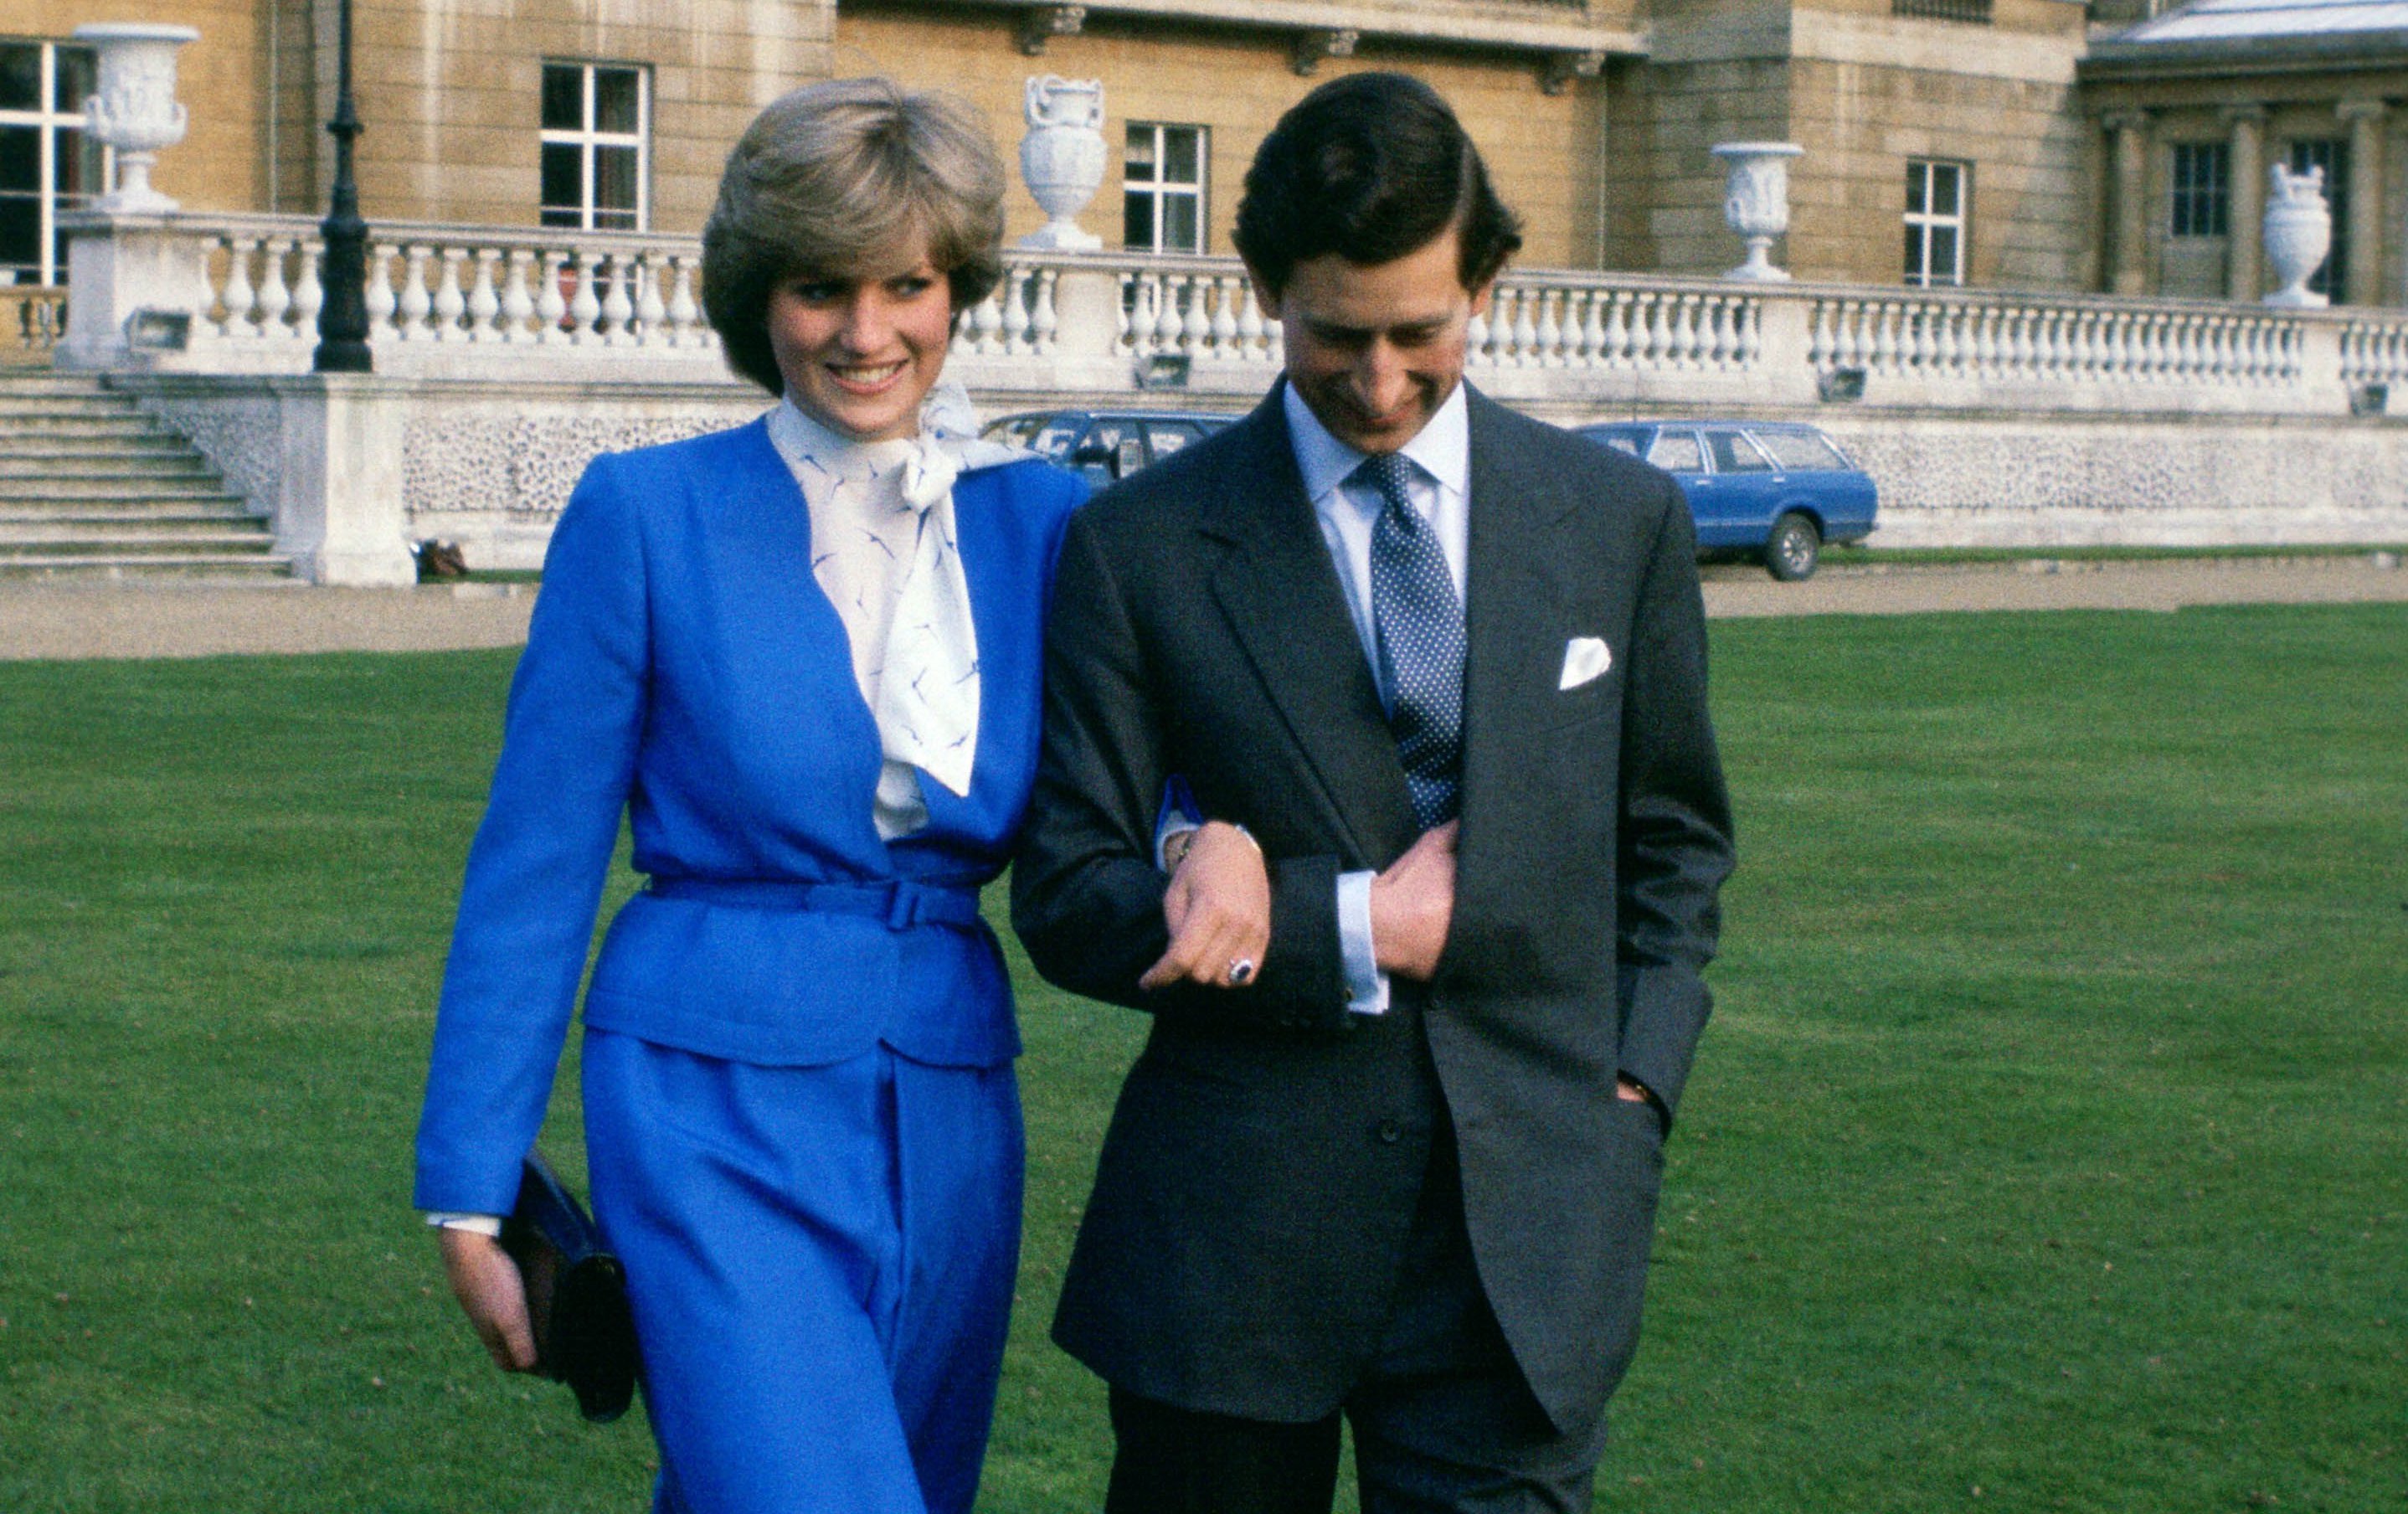 Prince Charles (later to become King Charles III) and Lady Diana Spencer (later to become Princess Diana) in the gardens of Buckingham Palace on the day of announcing their engagement.